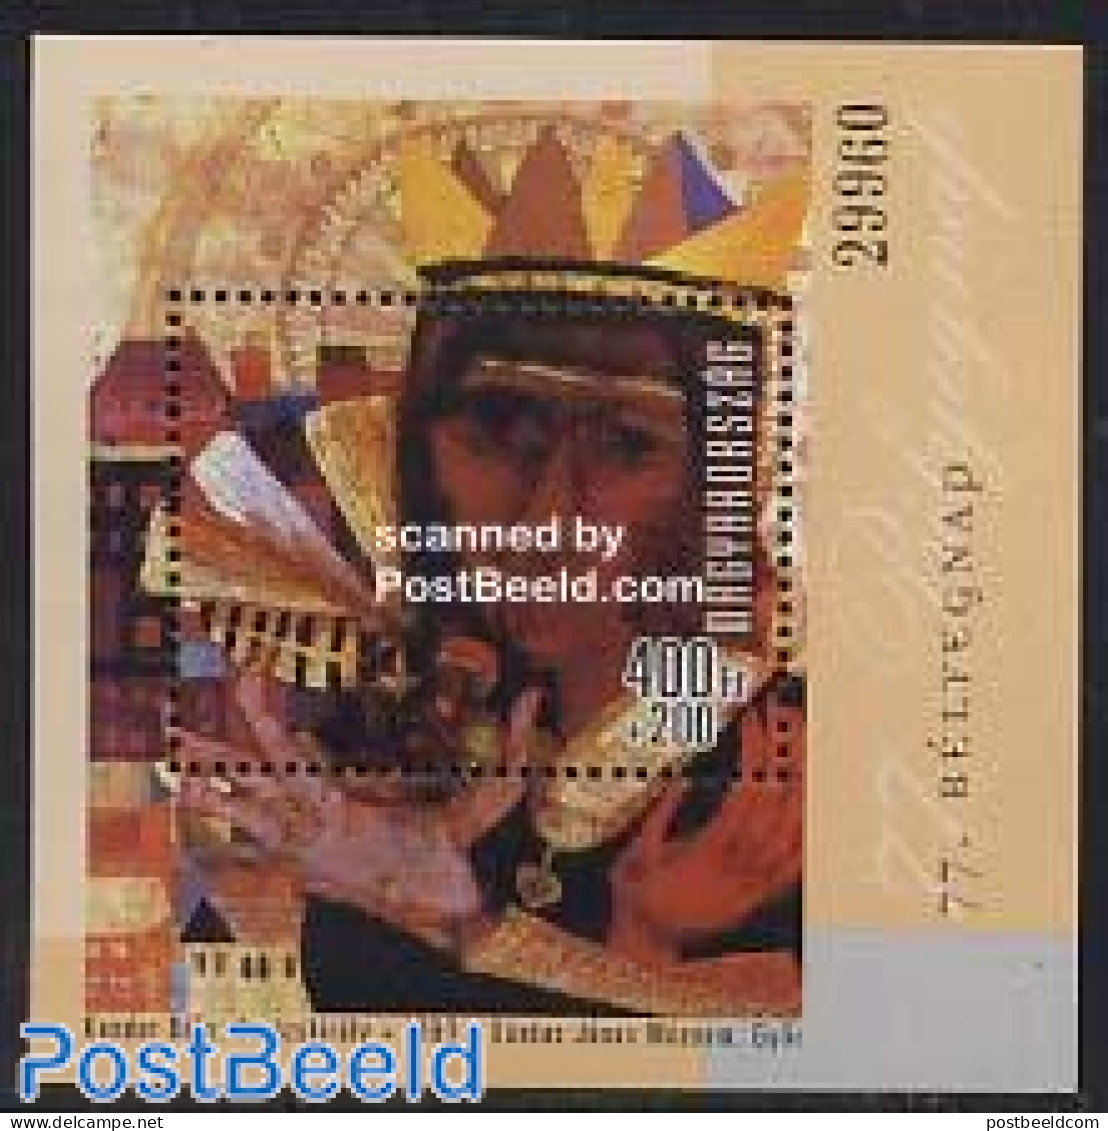 Hungary 2004 Stamp Day S/s, Mint NH, Stamp Day - Art - Modern Art (1850-present) - Nuevos